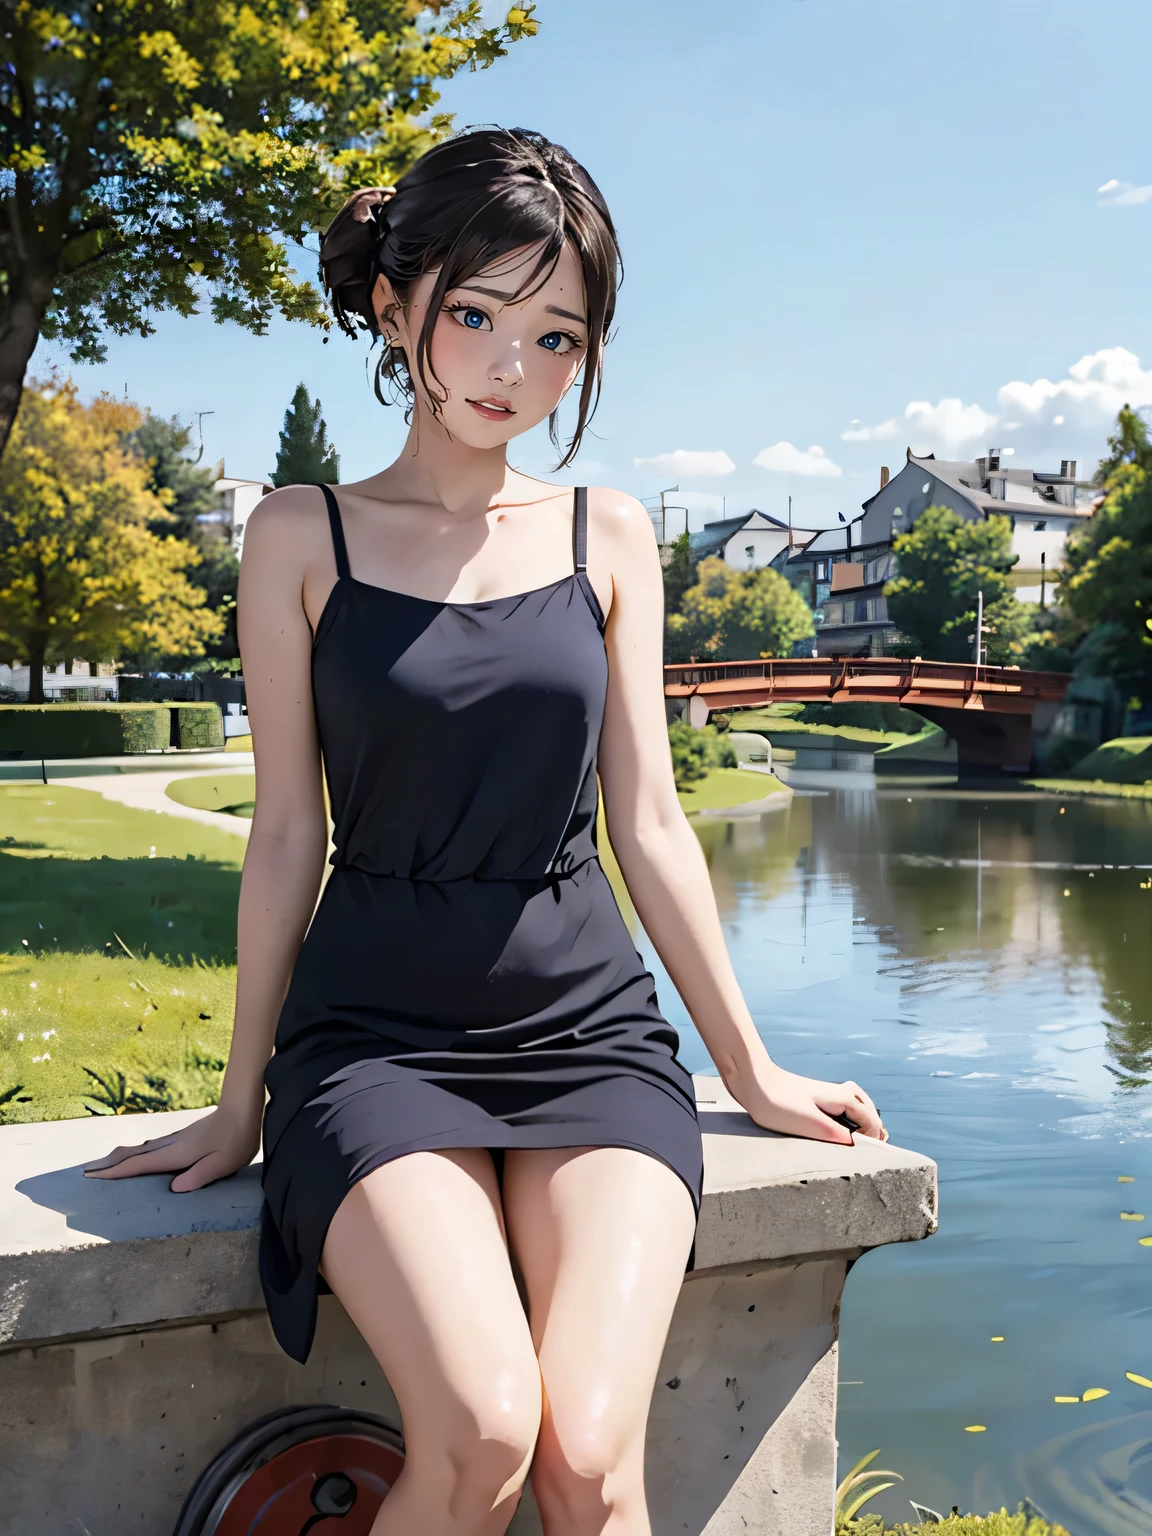 sitting on the bollard, spread her legs, all sorts of pattern of casual dress, tiny earrings, sweat, joying smile, her hand is on her groin, in the park, pond, bridge, big sky, buildings, light-makeup,